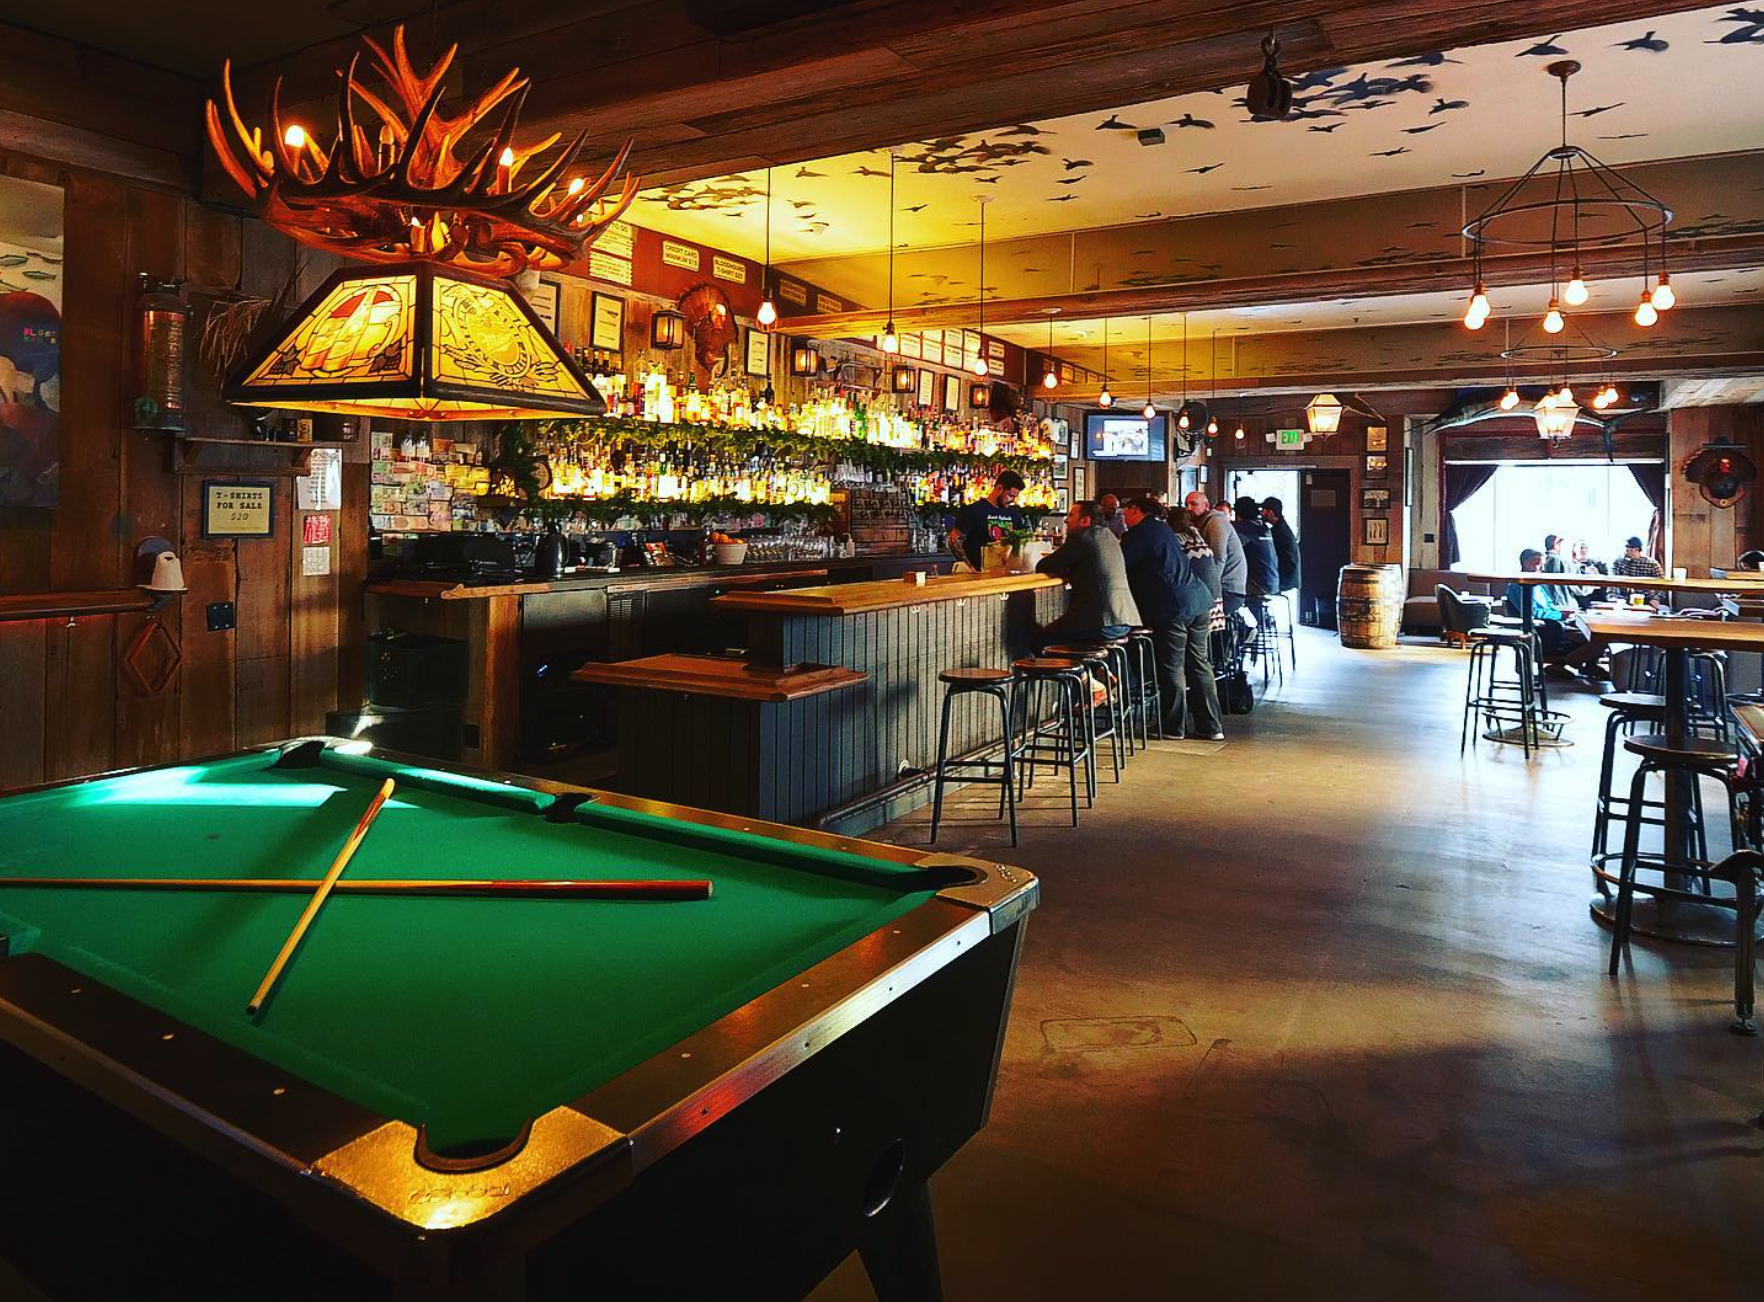 A pool table stands in the foreground of a photo showing a bar.